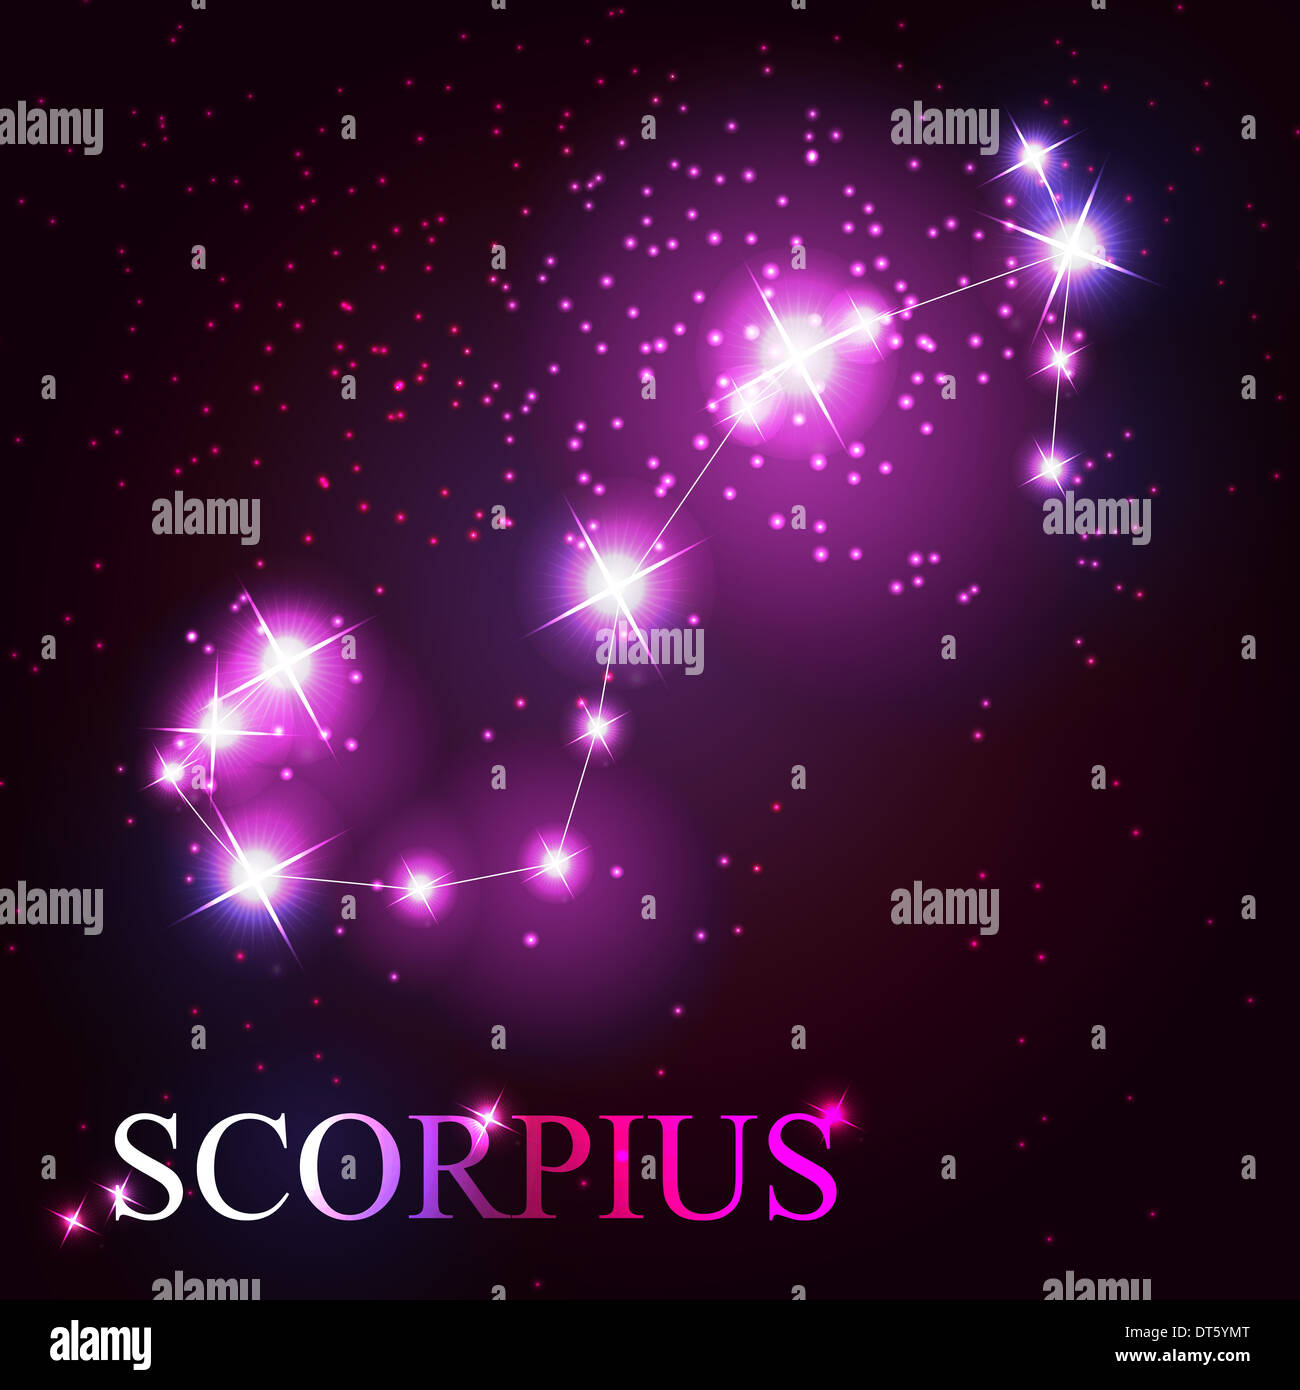 Scorpius zodiac sign of the beautiful bright stars on the background of cosmic sky Stock Photo